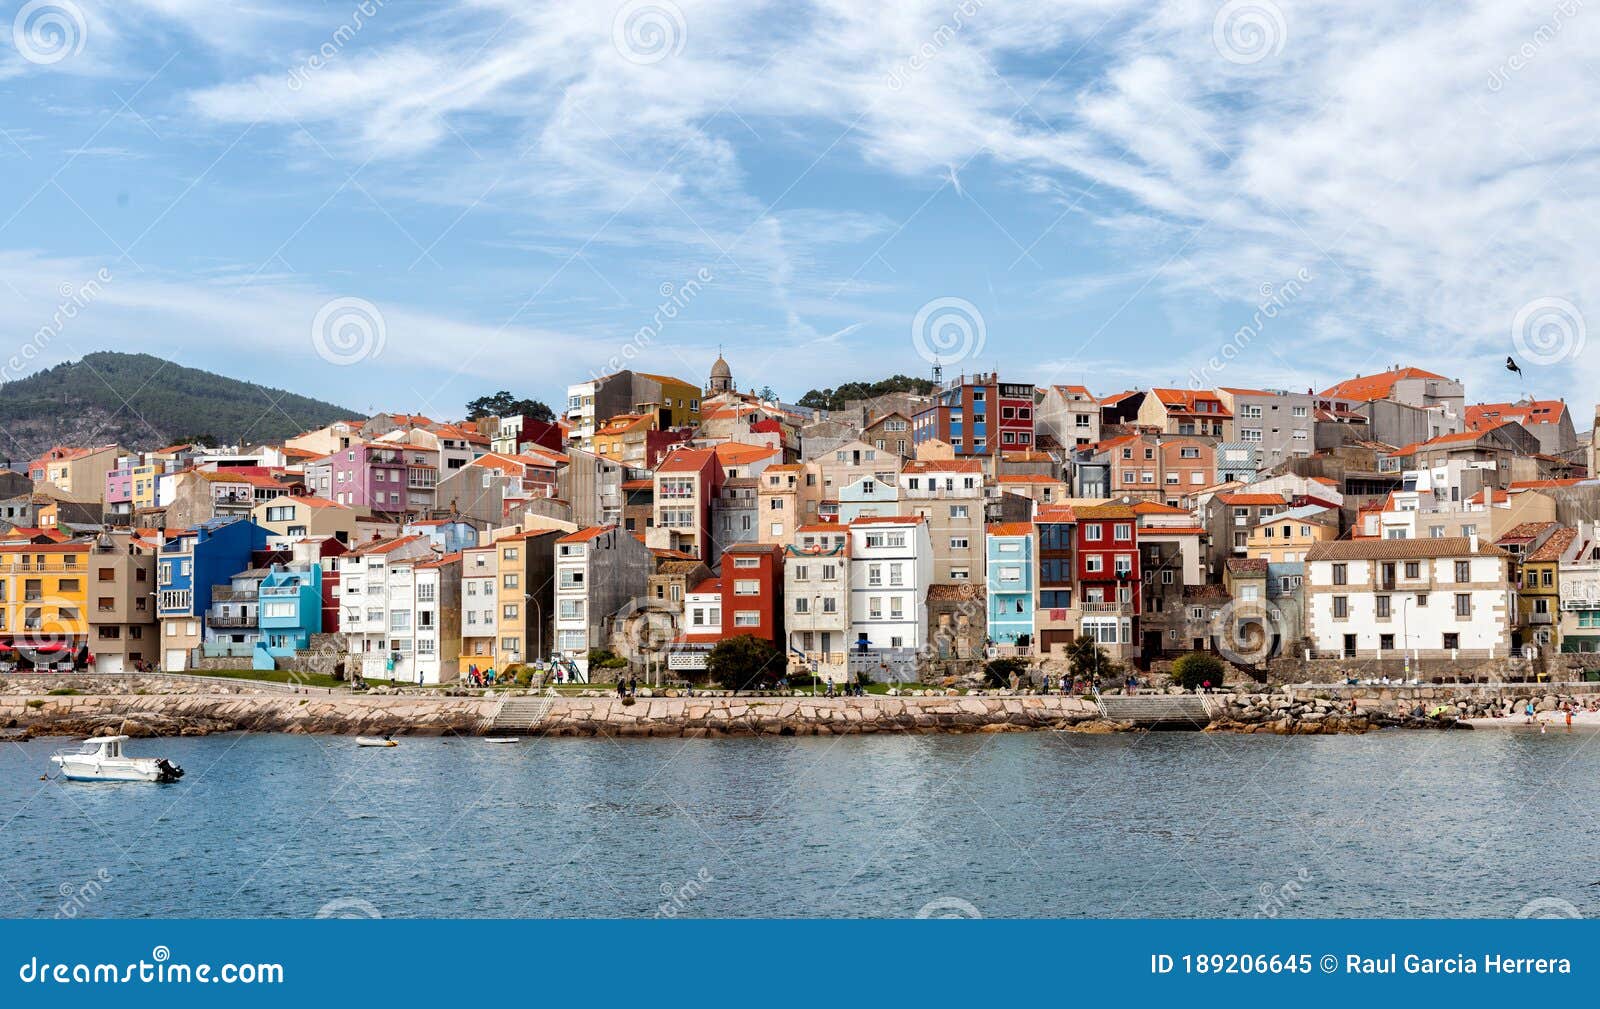 traditional fishing village in a guarda. pontevedra. tourism in galicia. the most beautiful spots in spain